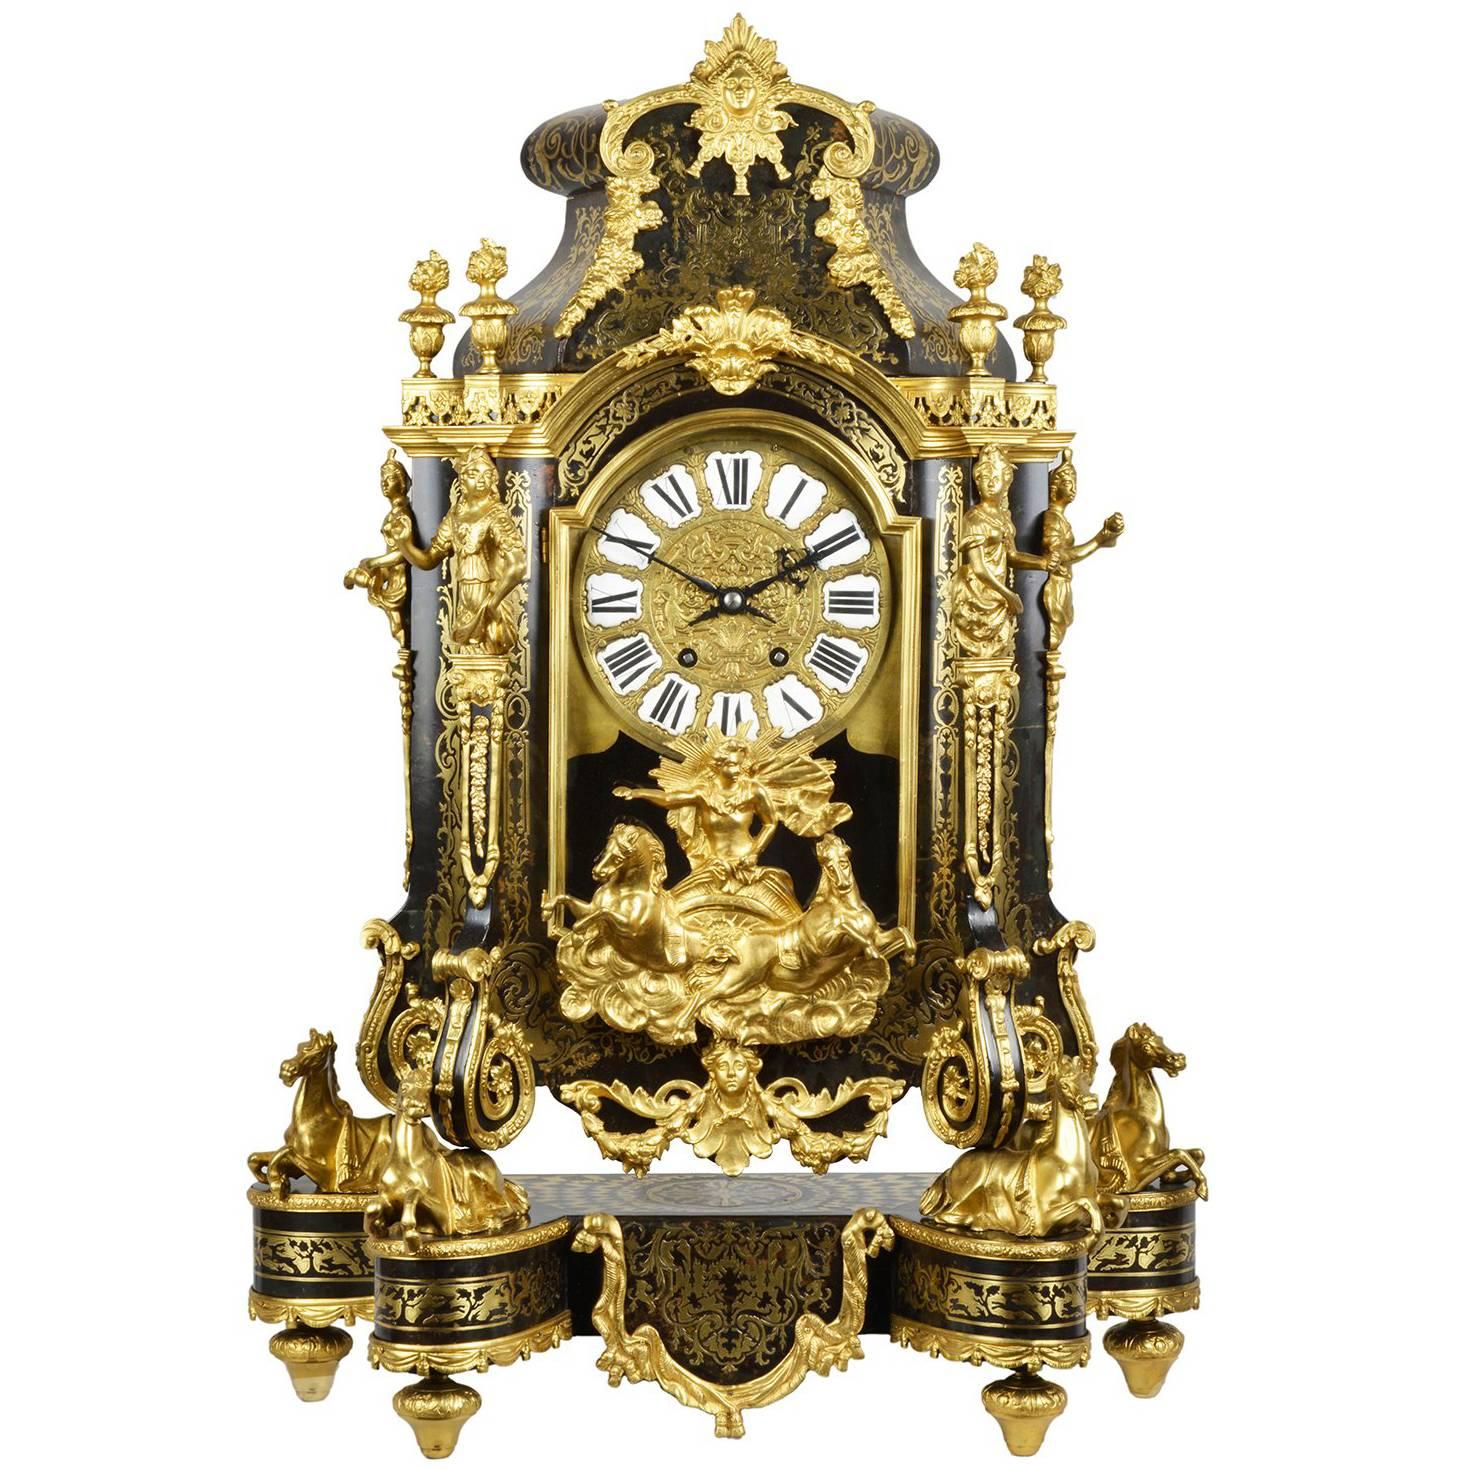 Large, 19th Century Boulle inlaid Mantel clock